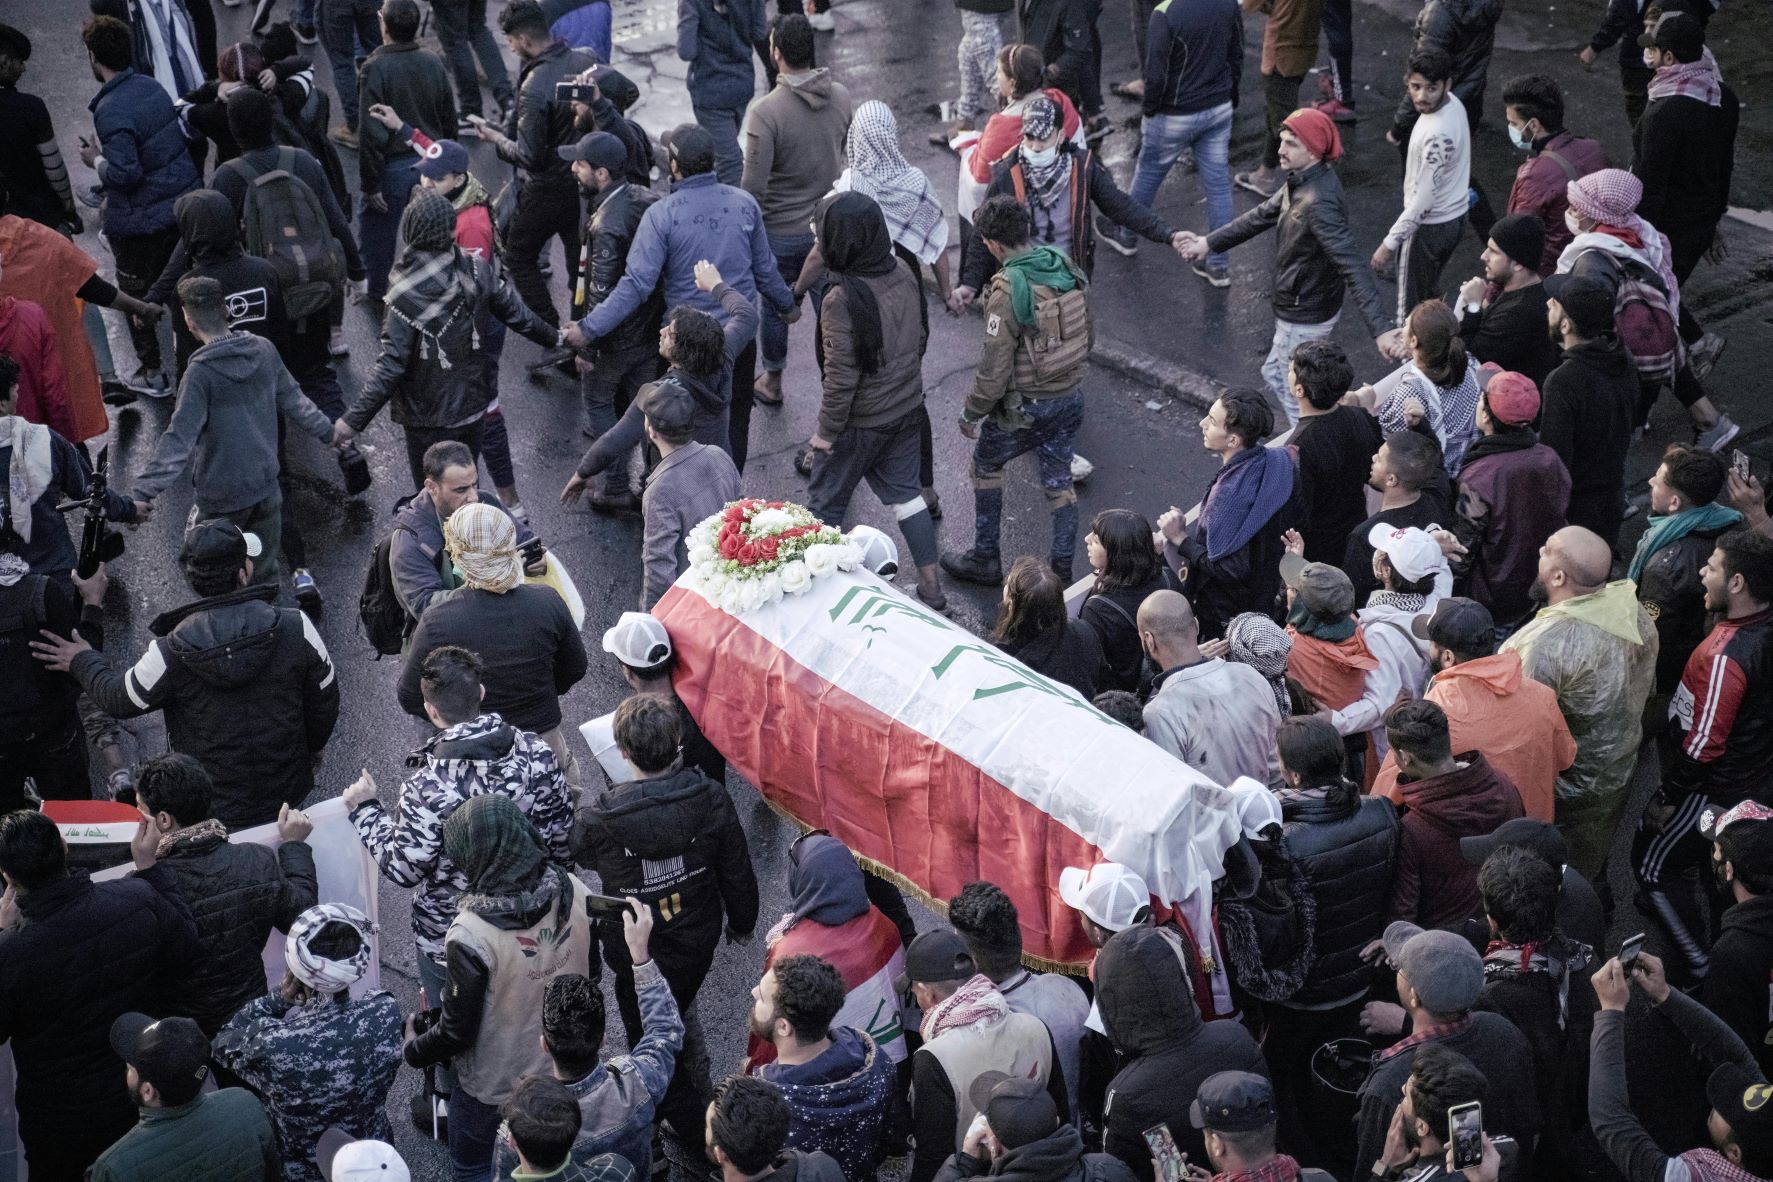 Mourners carry the coffin of Yussef Sattar, a local journalist who was reportedly killed while covering anti-government demonstrations, during his funeral in the capital Baghdad in January 2020 (AFP)